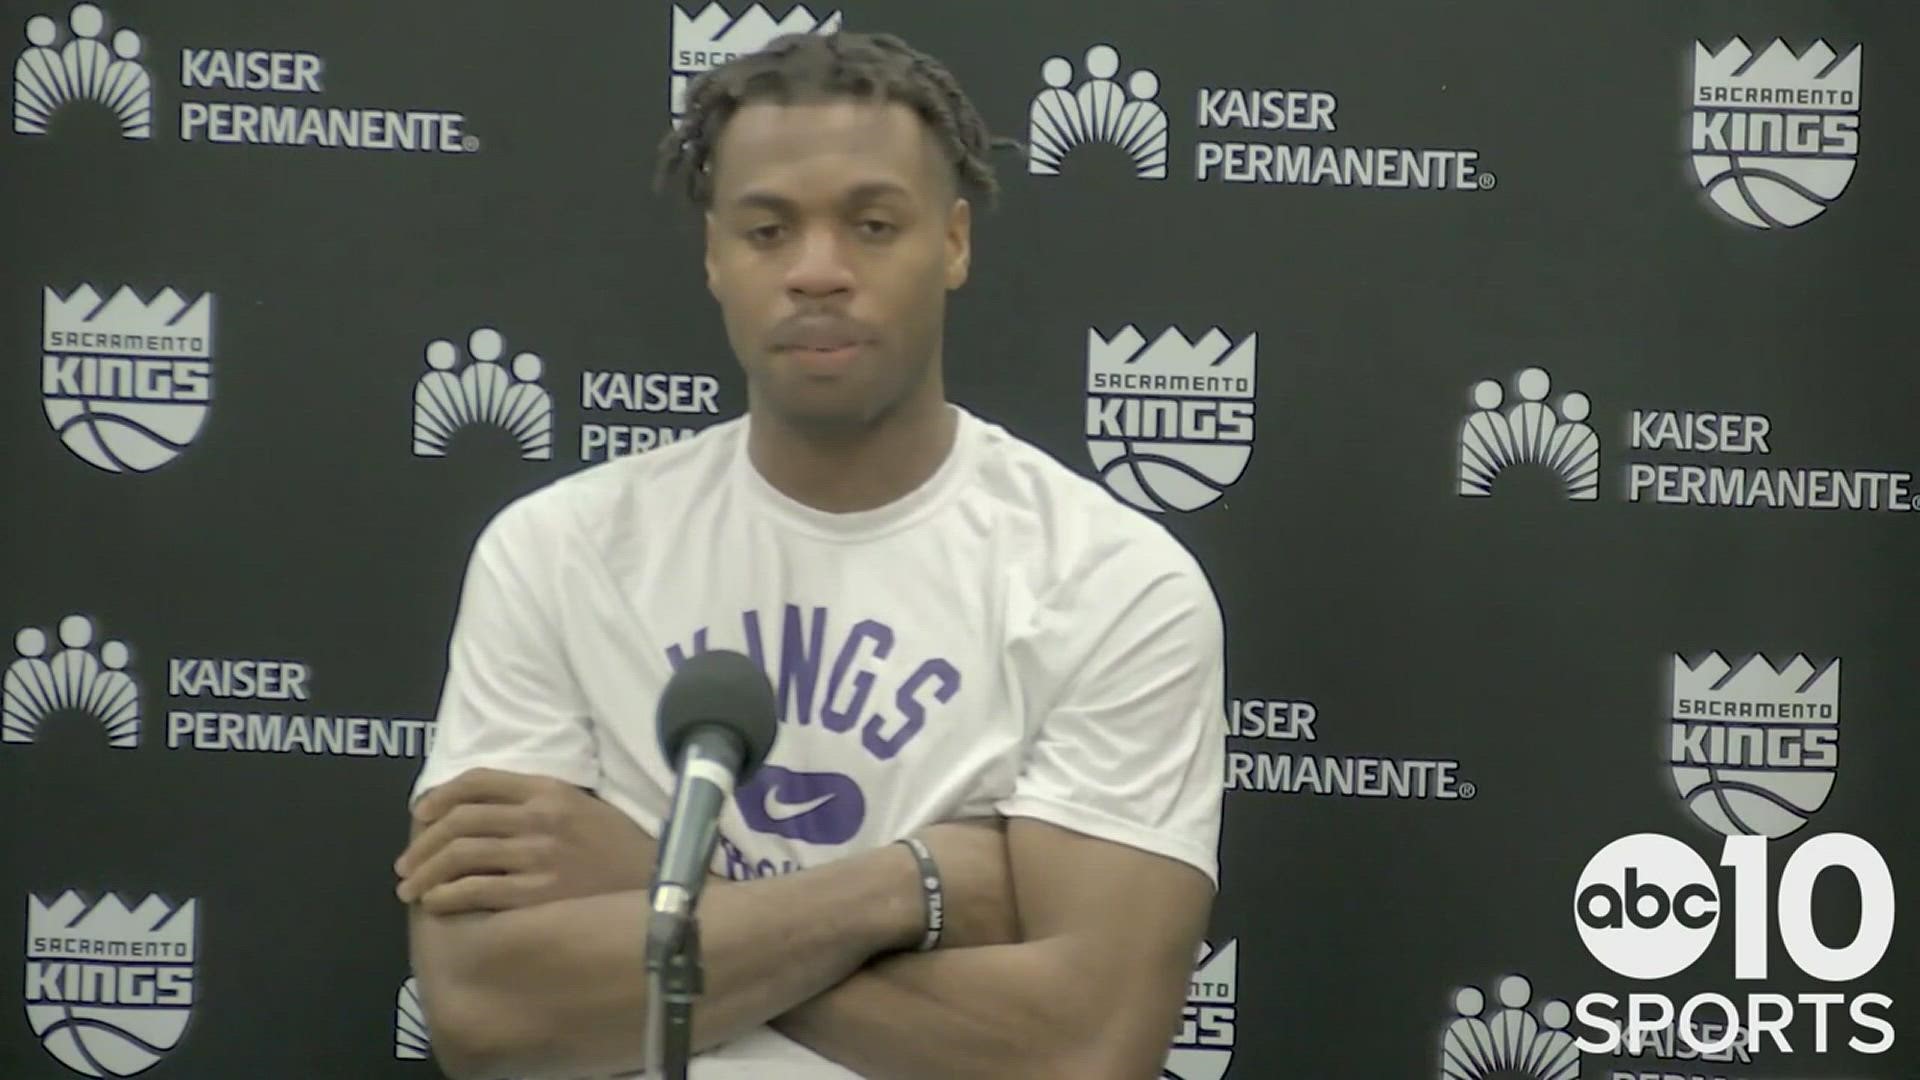 Kings SG Buddy Hield tries to explain Sacramento's shortcomings with poor shooting and terrible defense in Sunday's 128-101 loss in Memphis to the Grizzlies.